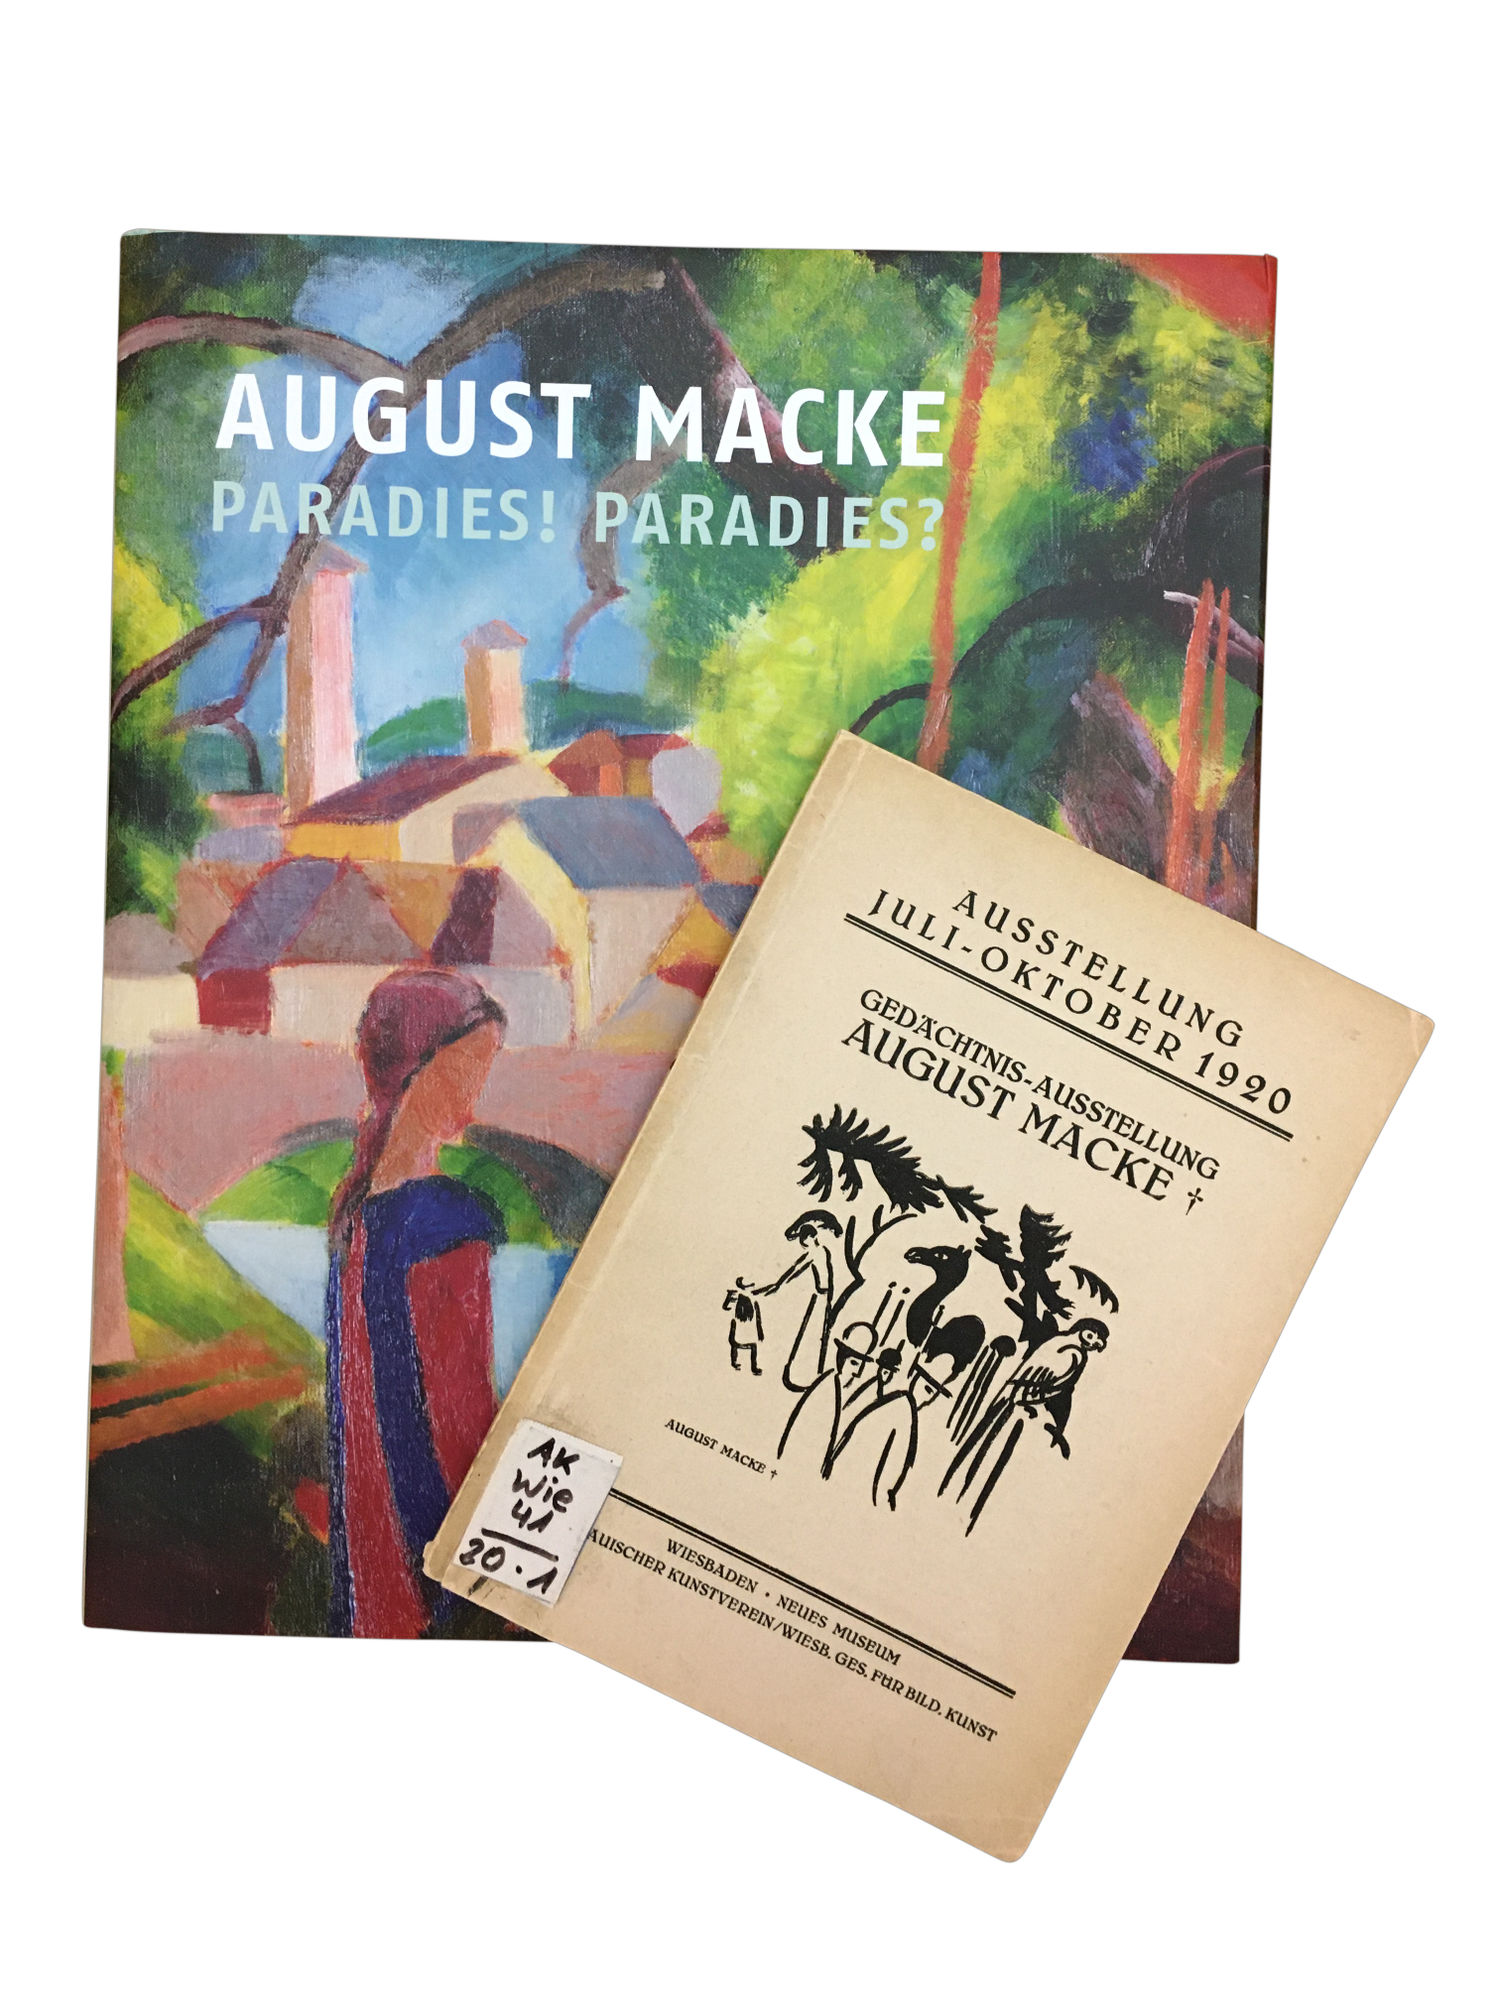 Catalogue for the August Macke Memorial Exhibition at the Neues Museum Wiesbaden, 1920. Photo: Museum Wiesbaden